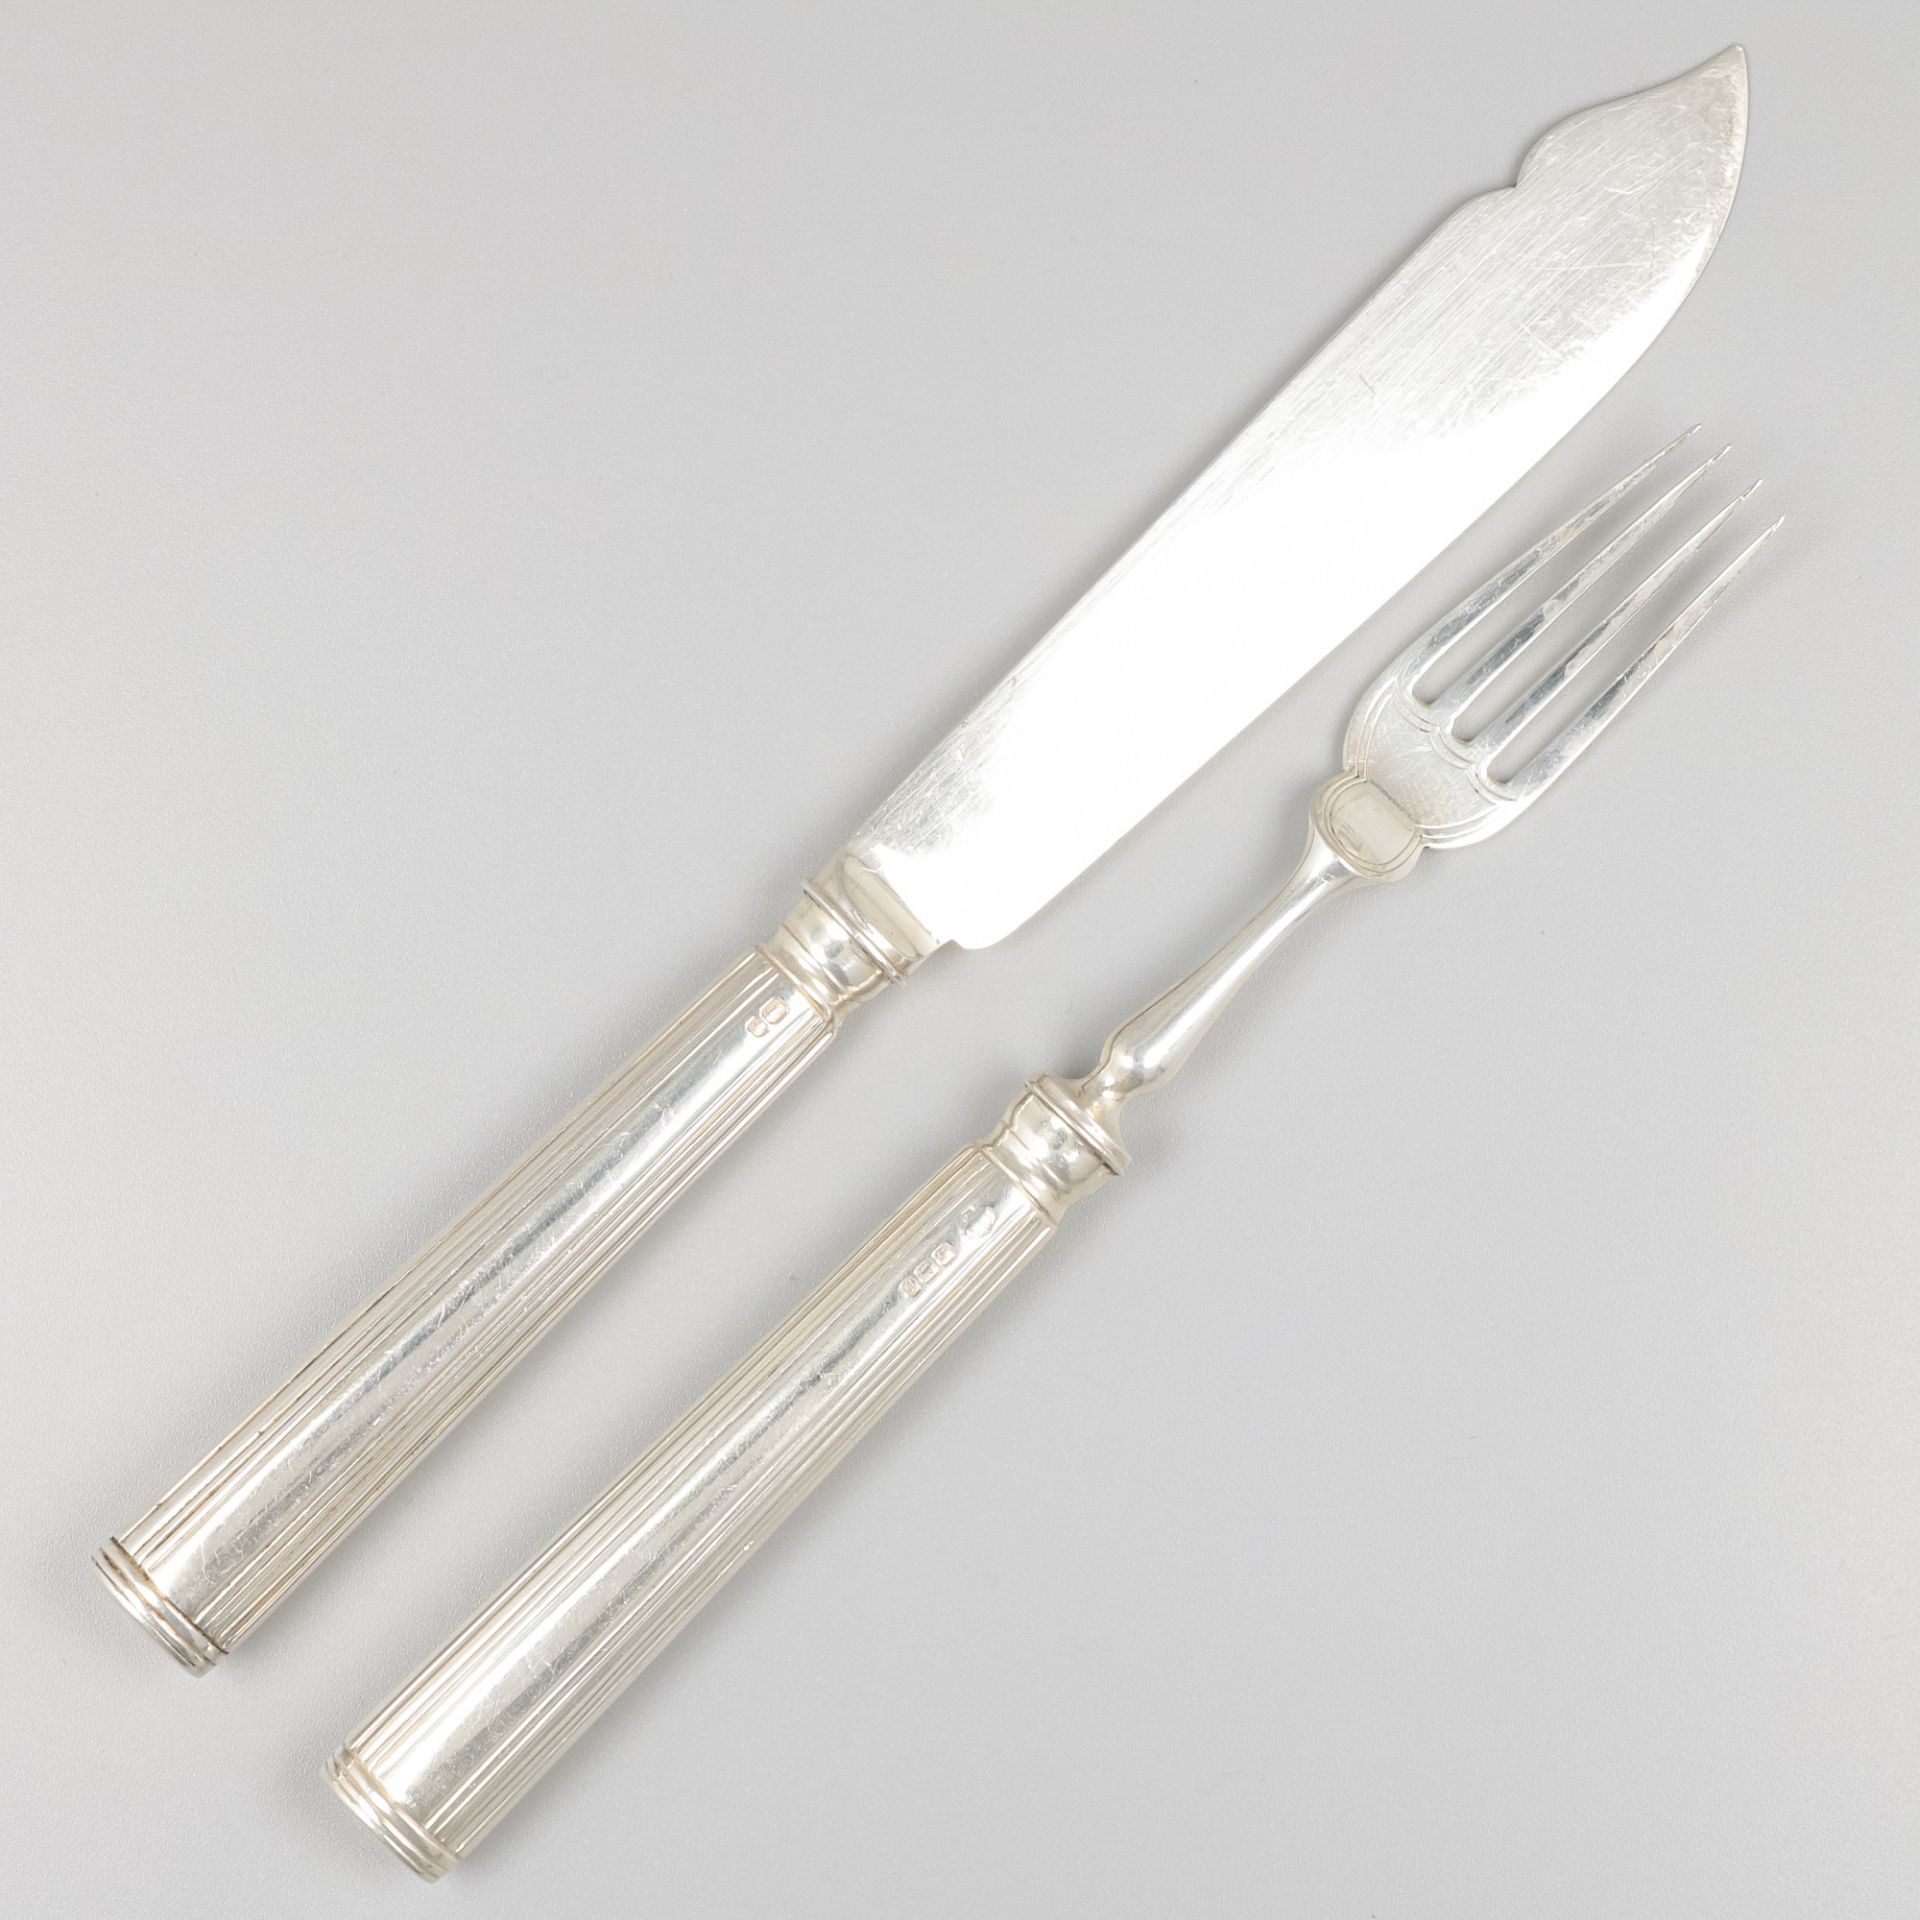 24-piece set fish cutlery, silver. - Image 6 of 12